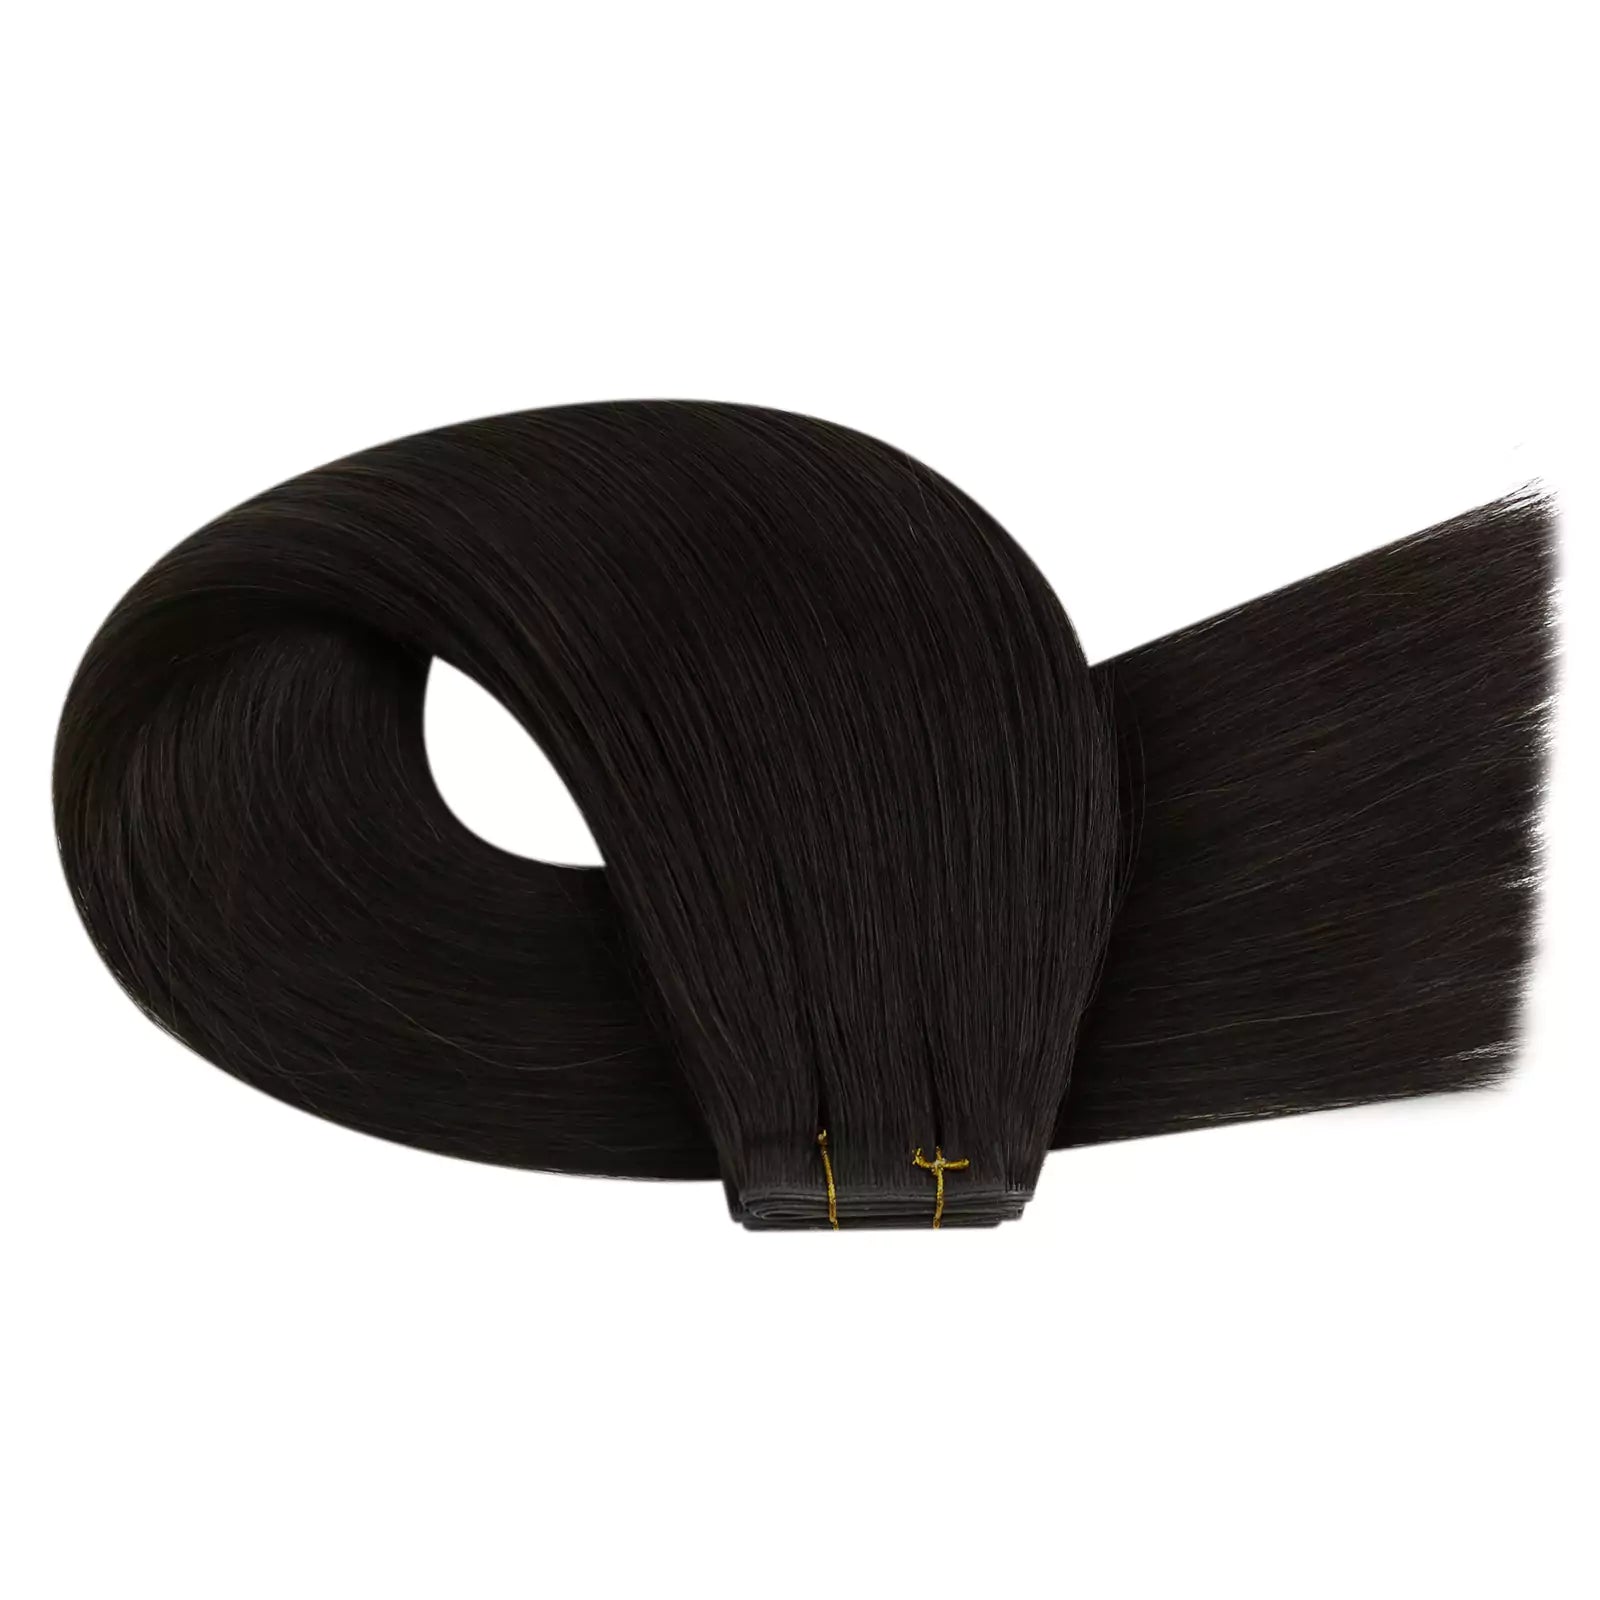 hole flat weft virgin hair weft extensions wholesale hair extensions